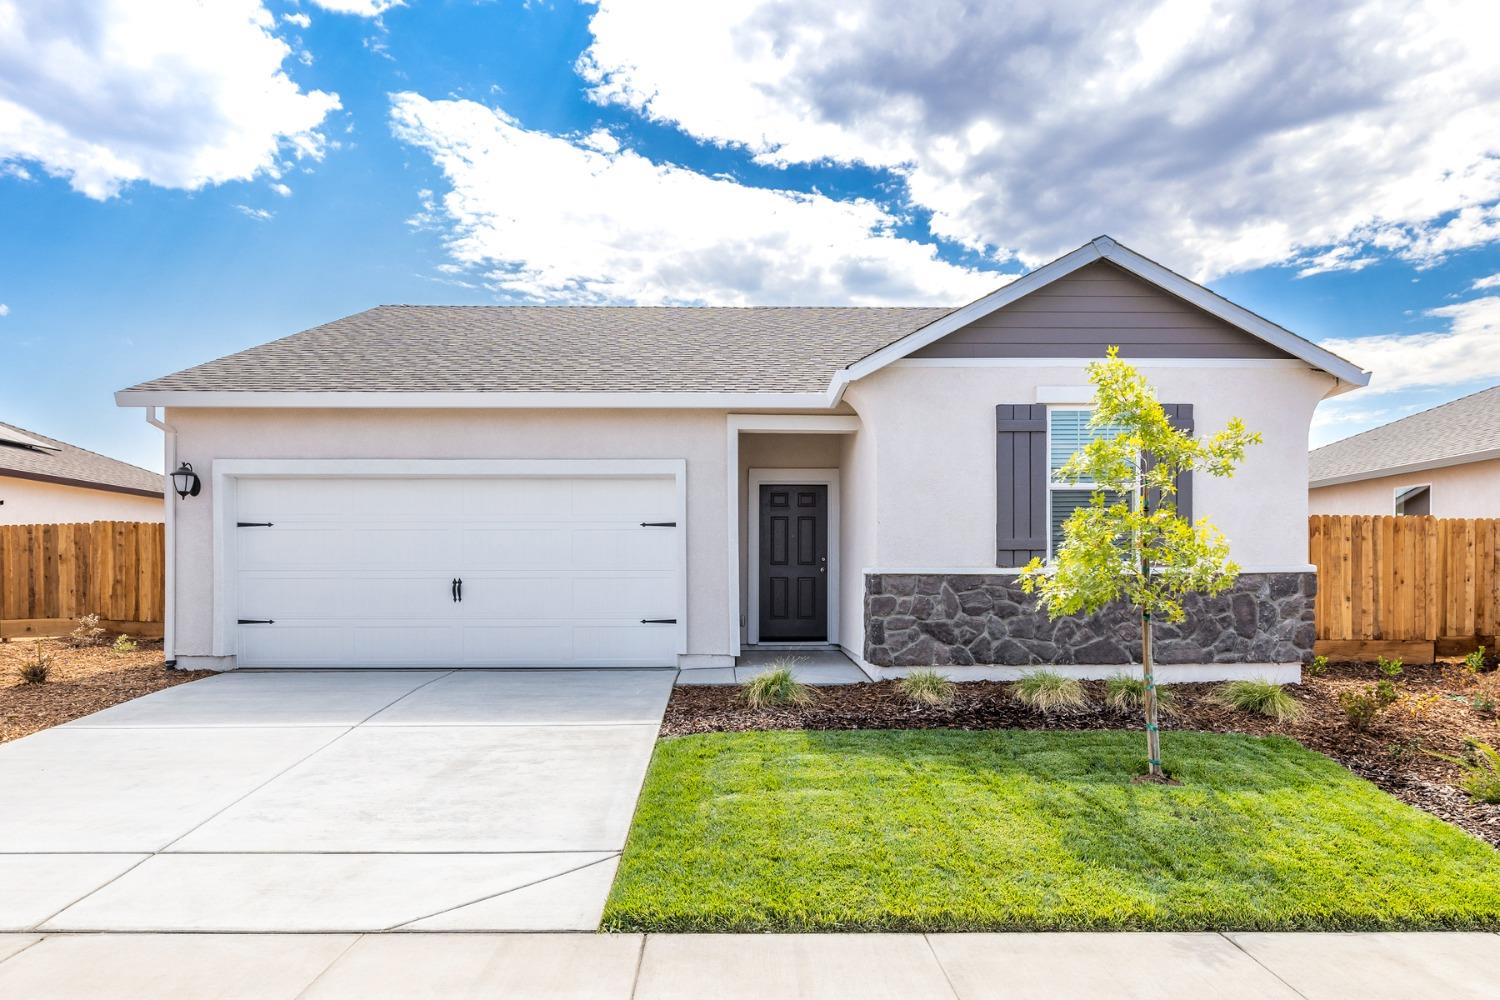 Detail Gallery Image 1 of 13 For 3472 Sina Ct, Stockton,  CA 95212 - 3 Beds | 2 Baths